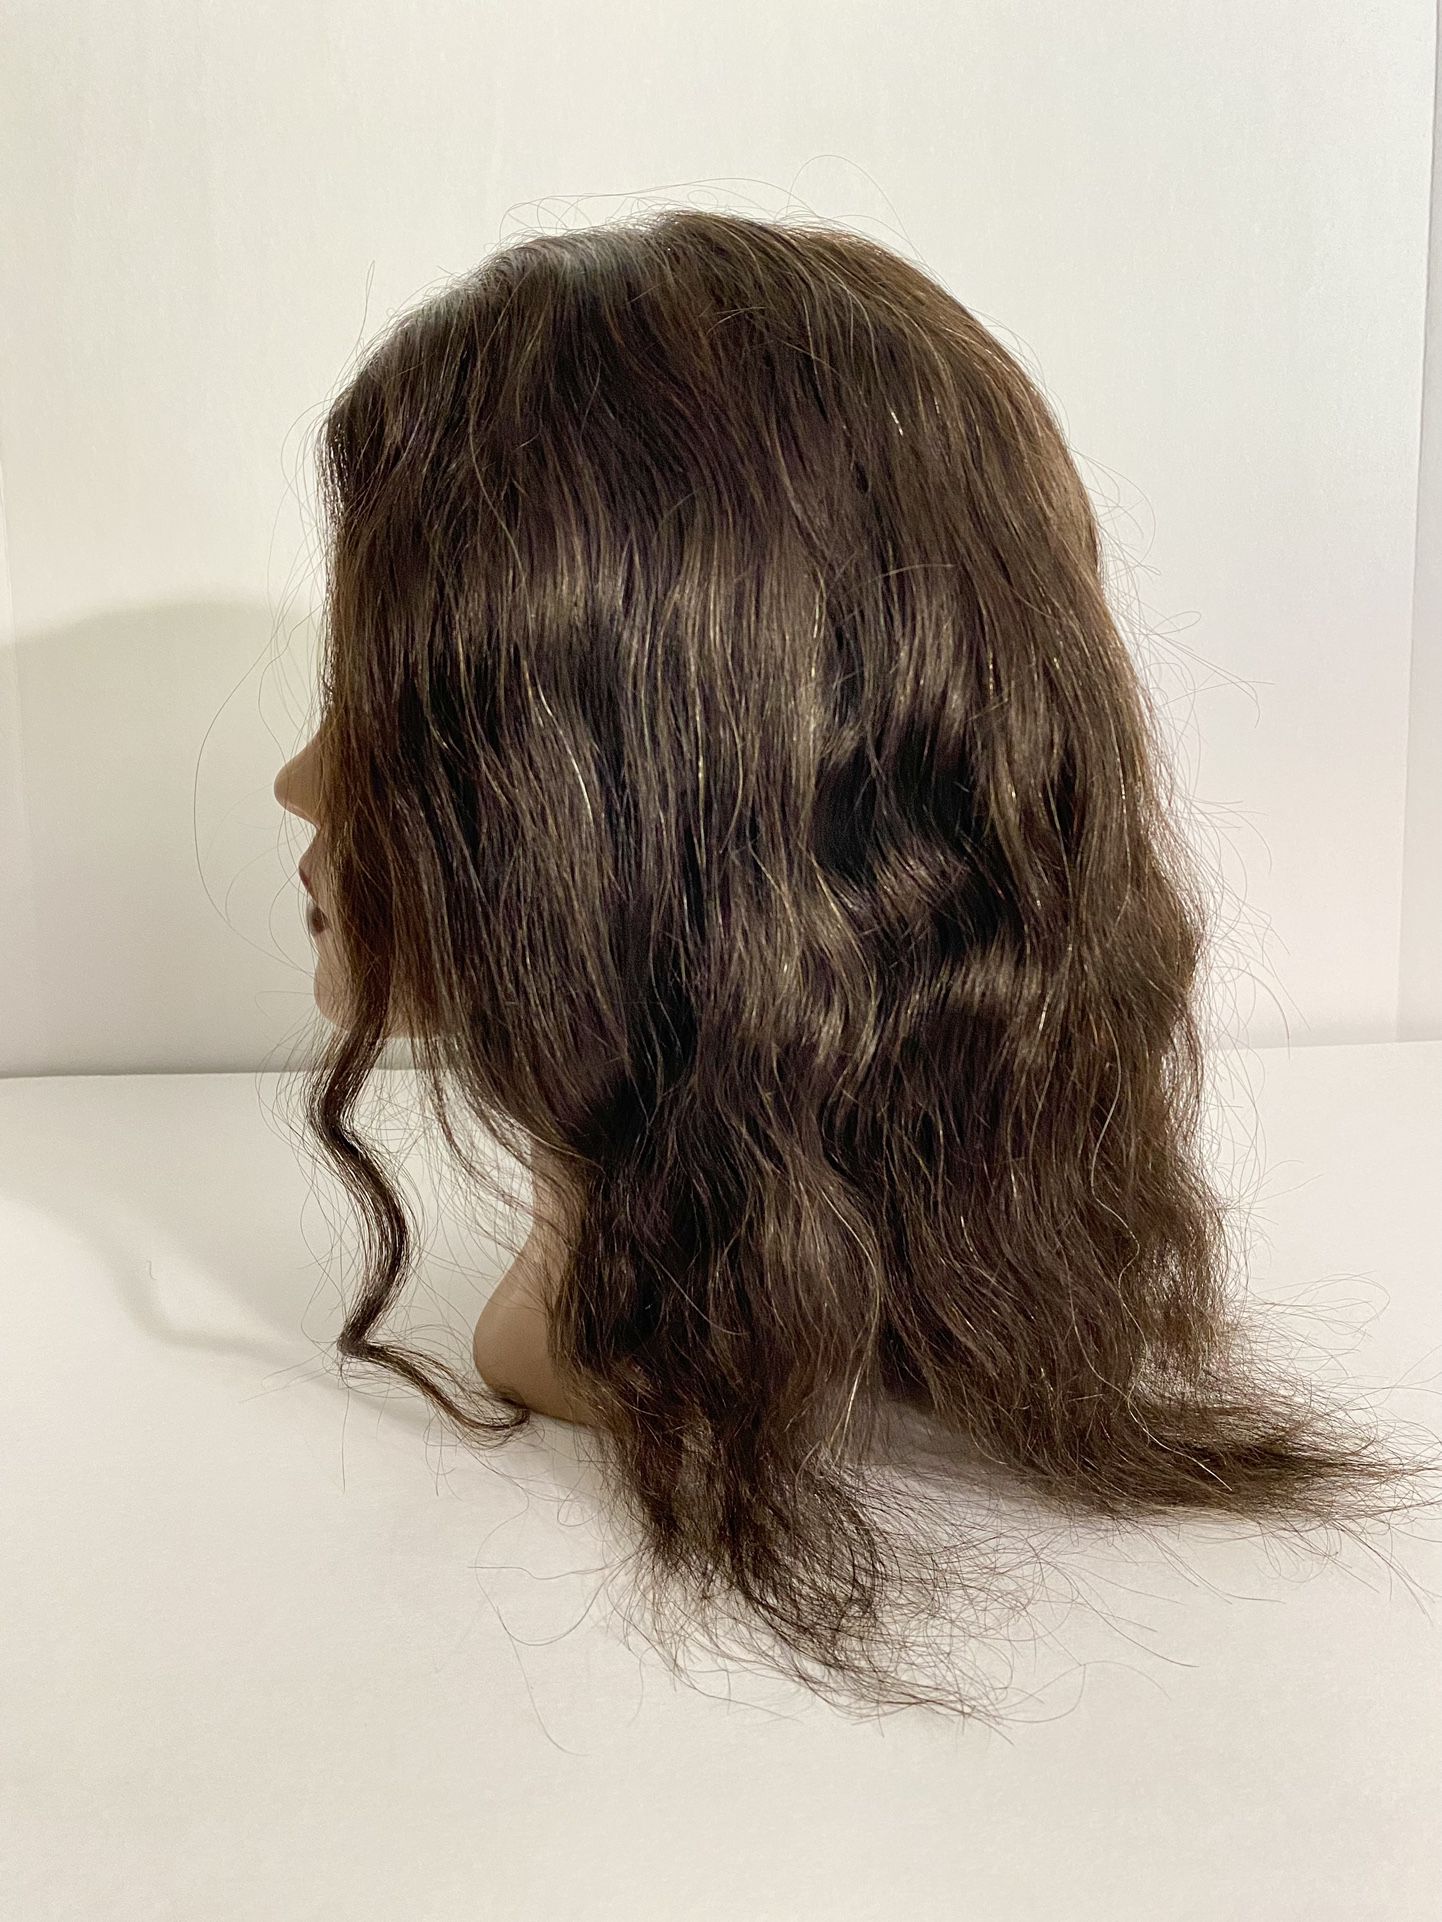 mannequin Head For Hair Styling for Sale in Lakeland, FL - OfferUp